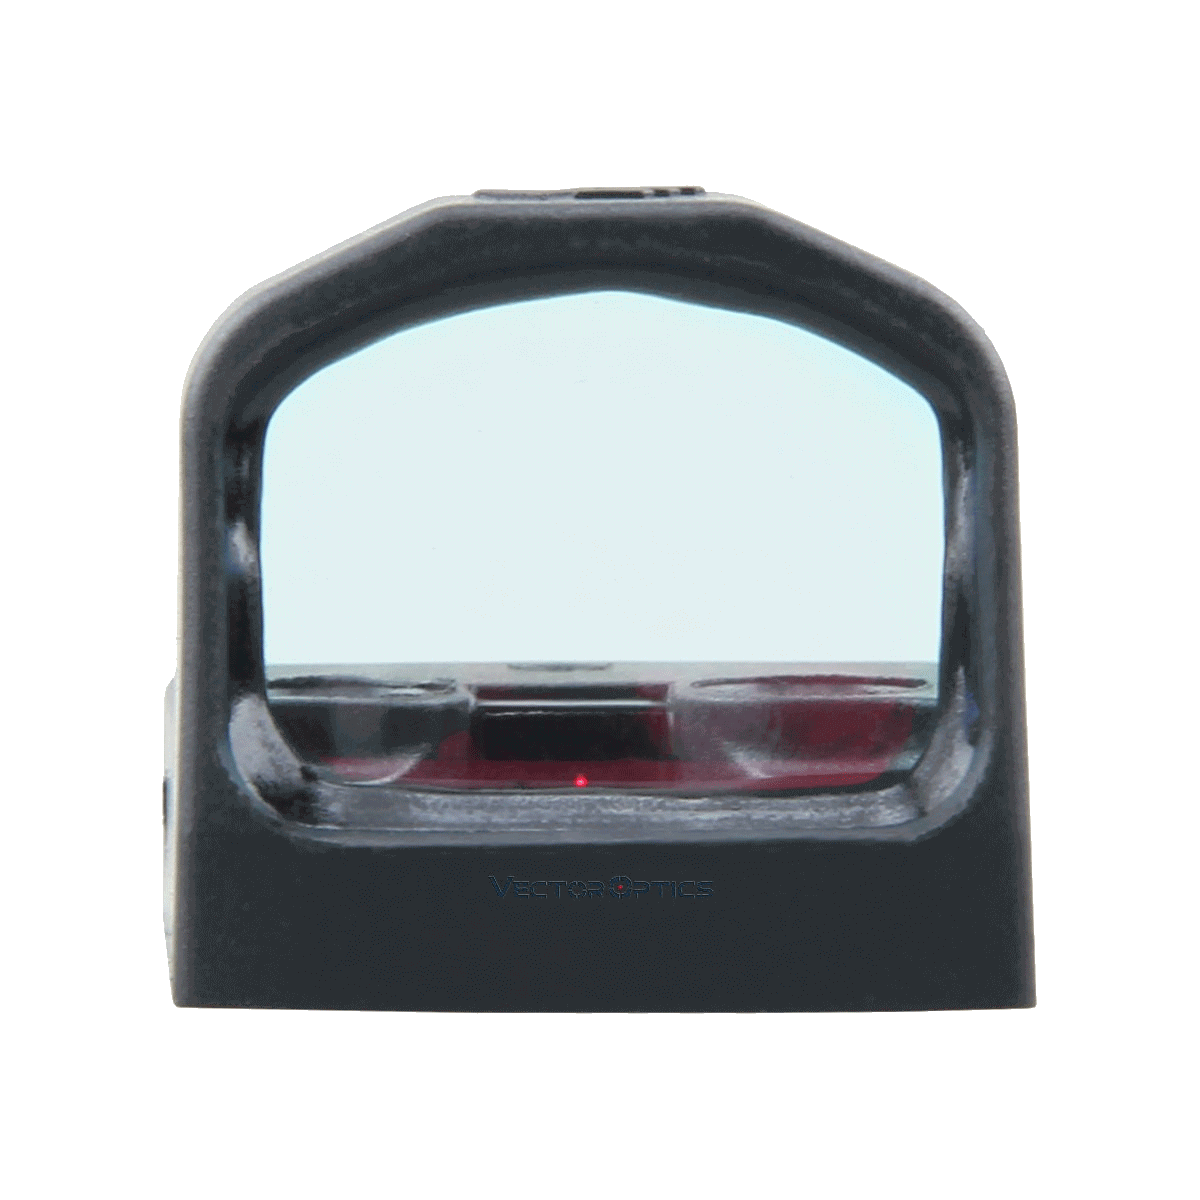 Frenzy-S 1x16x22 Engineering Polymer AUT Red Dot Sight